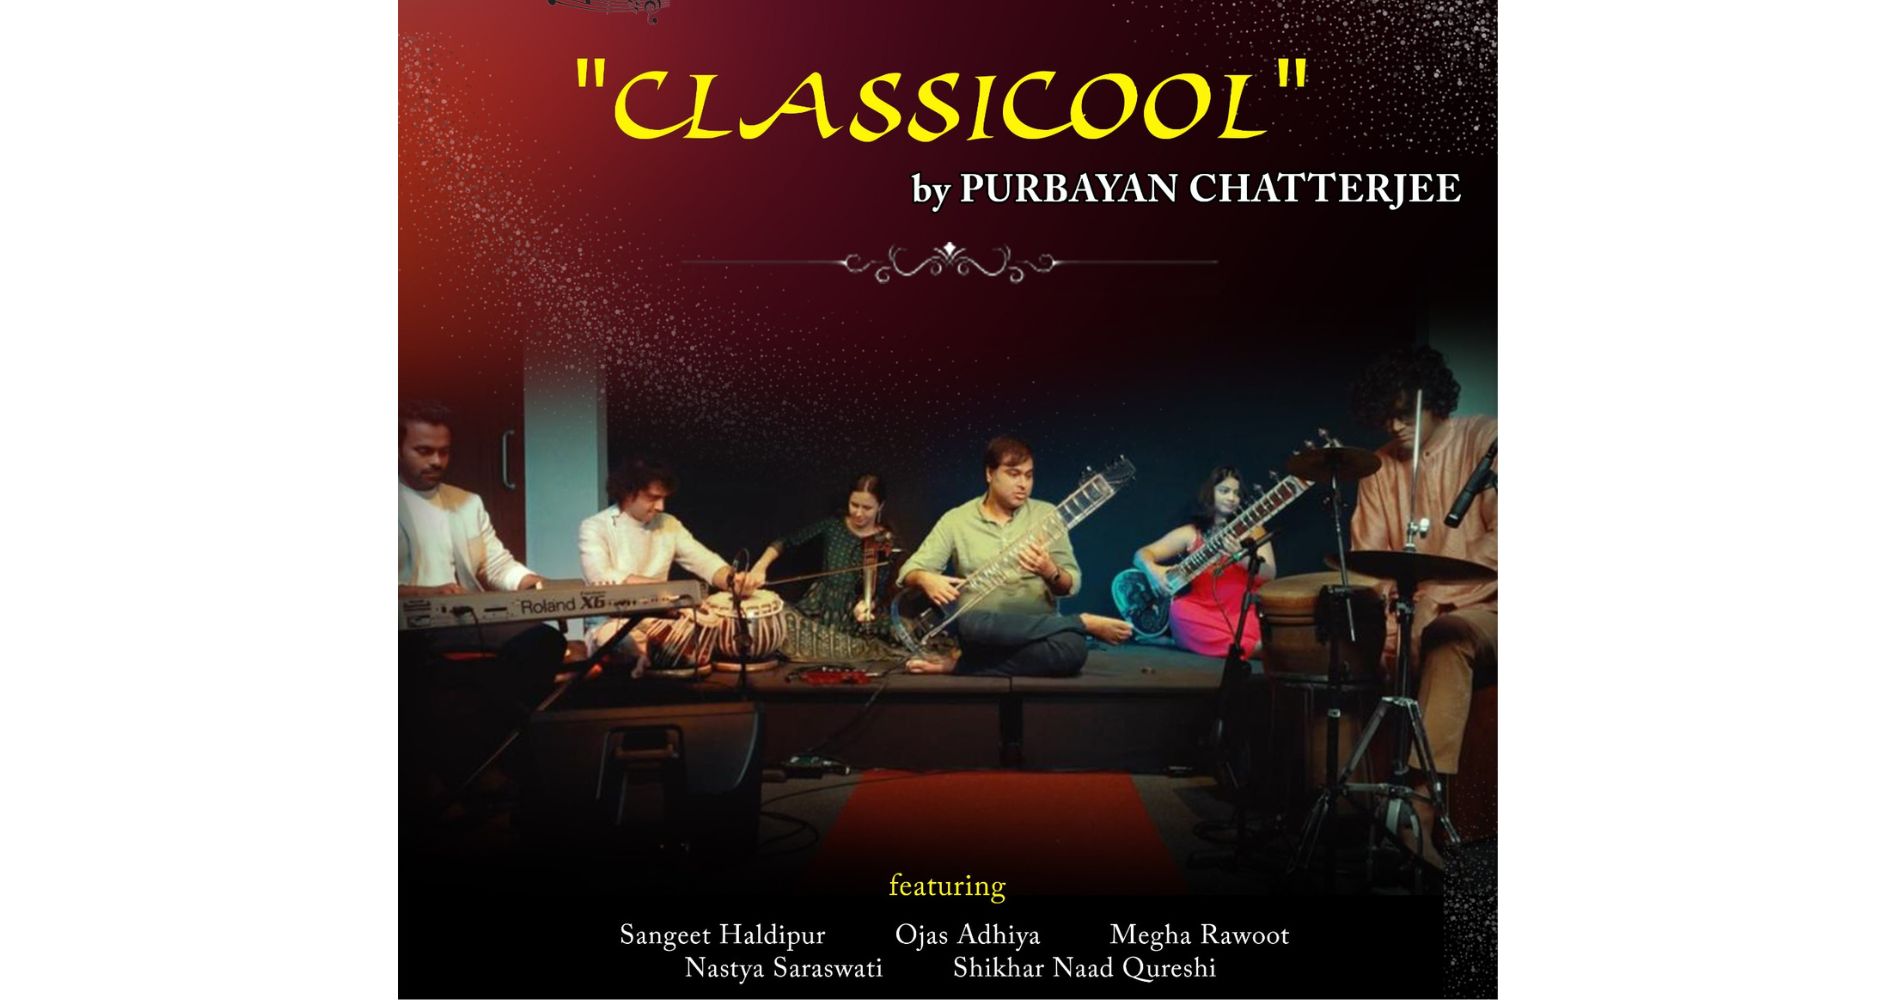 Sitar Maestro Purbayan Chatterjee Revisits 'CLASSICOOL' With A New EP